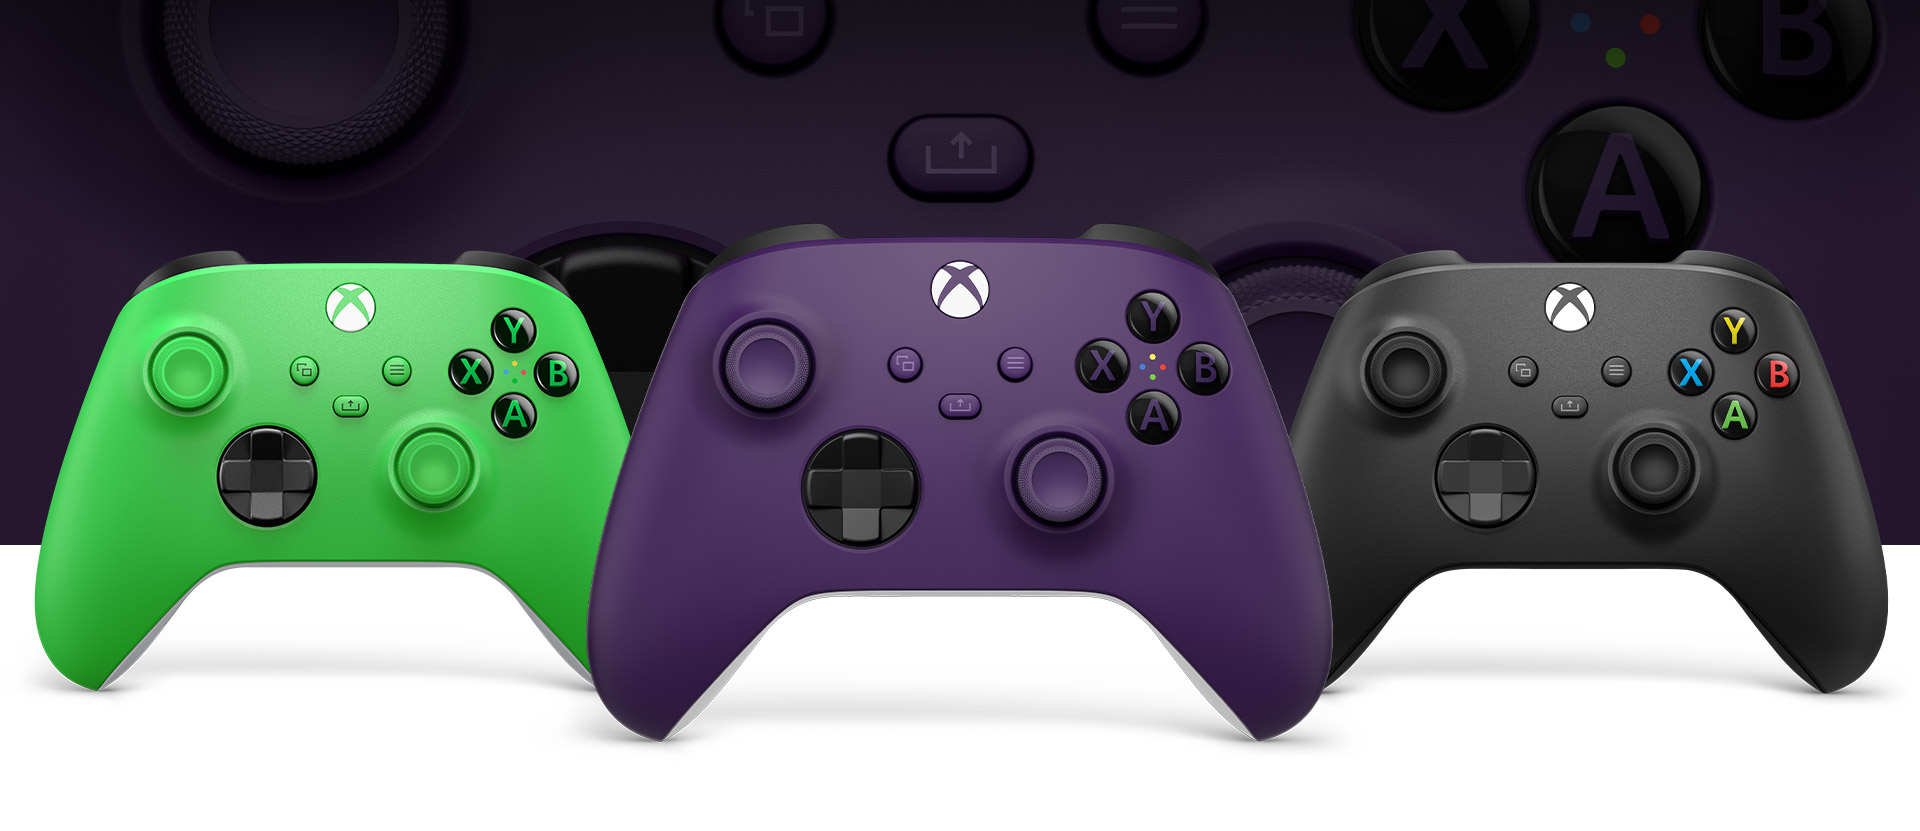 Xbox Purple controller in front with Green on left and Carbon Black on right